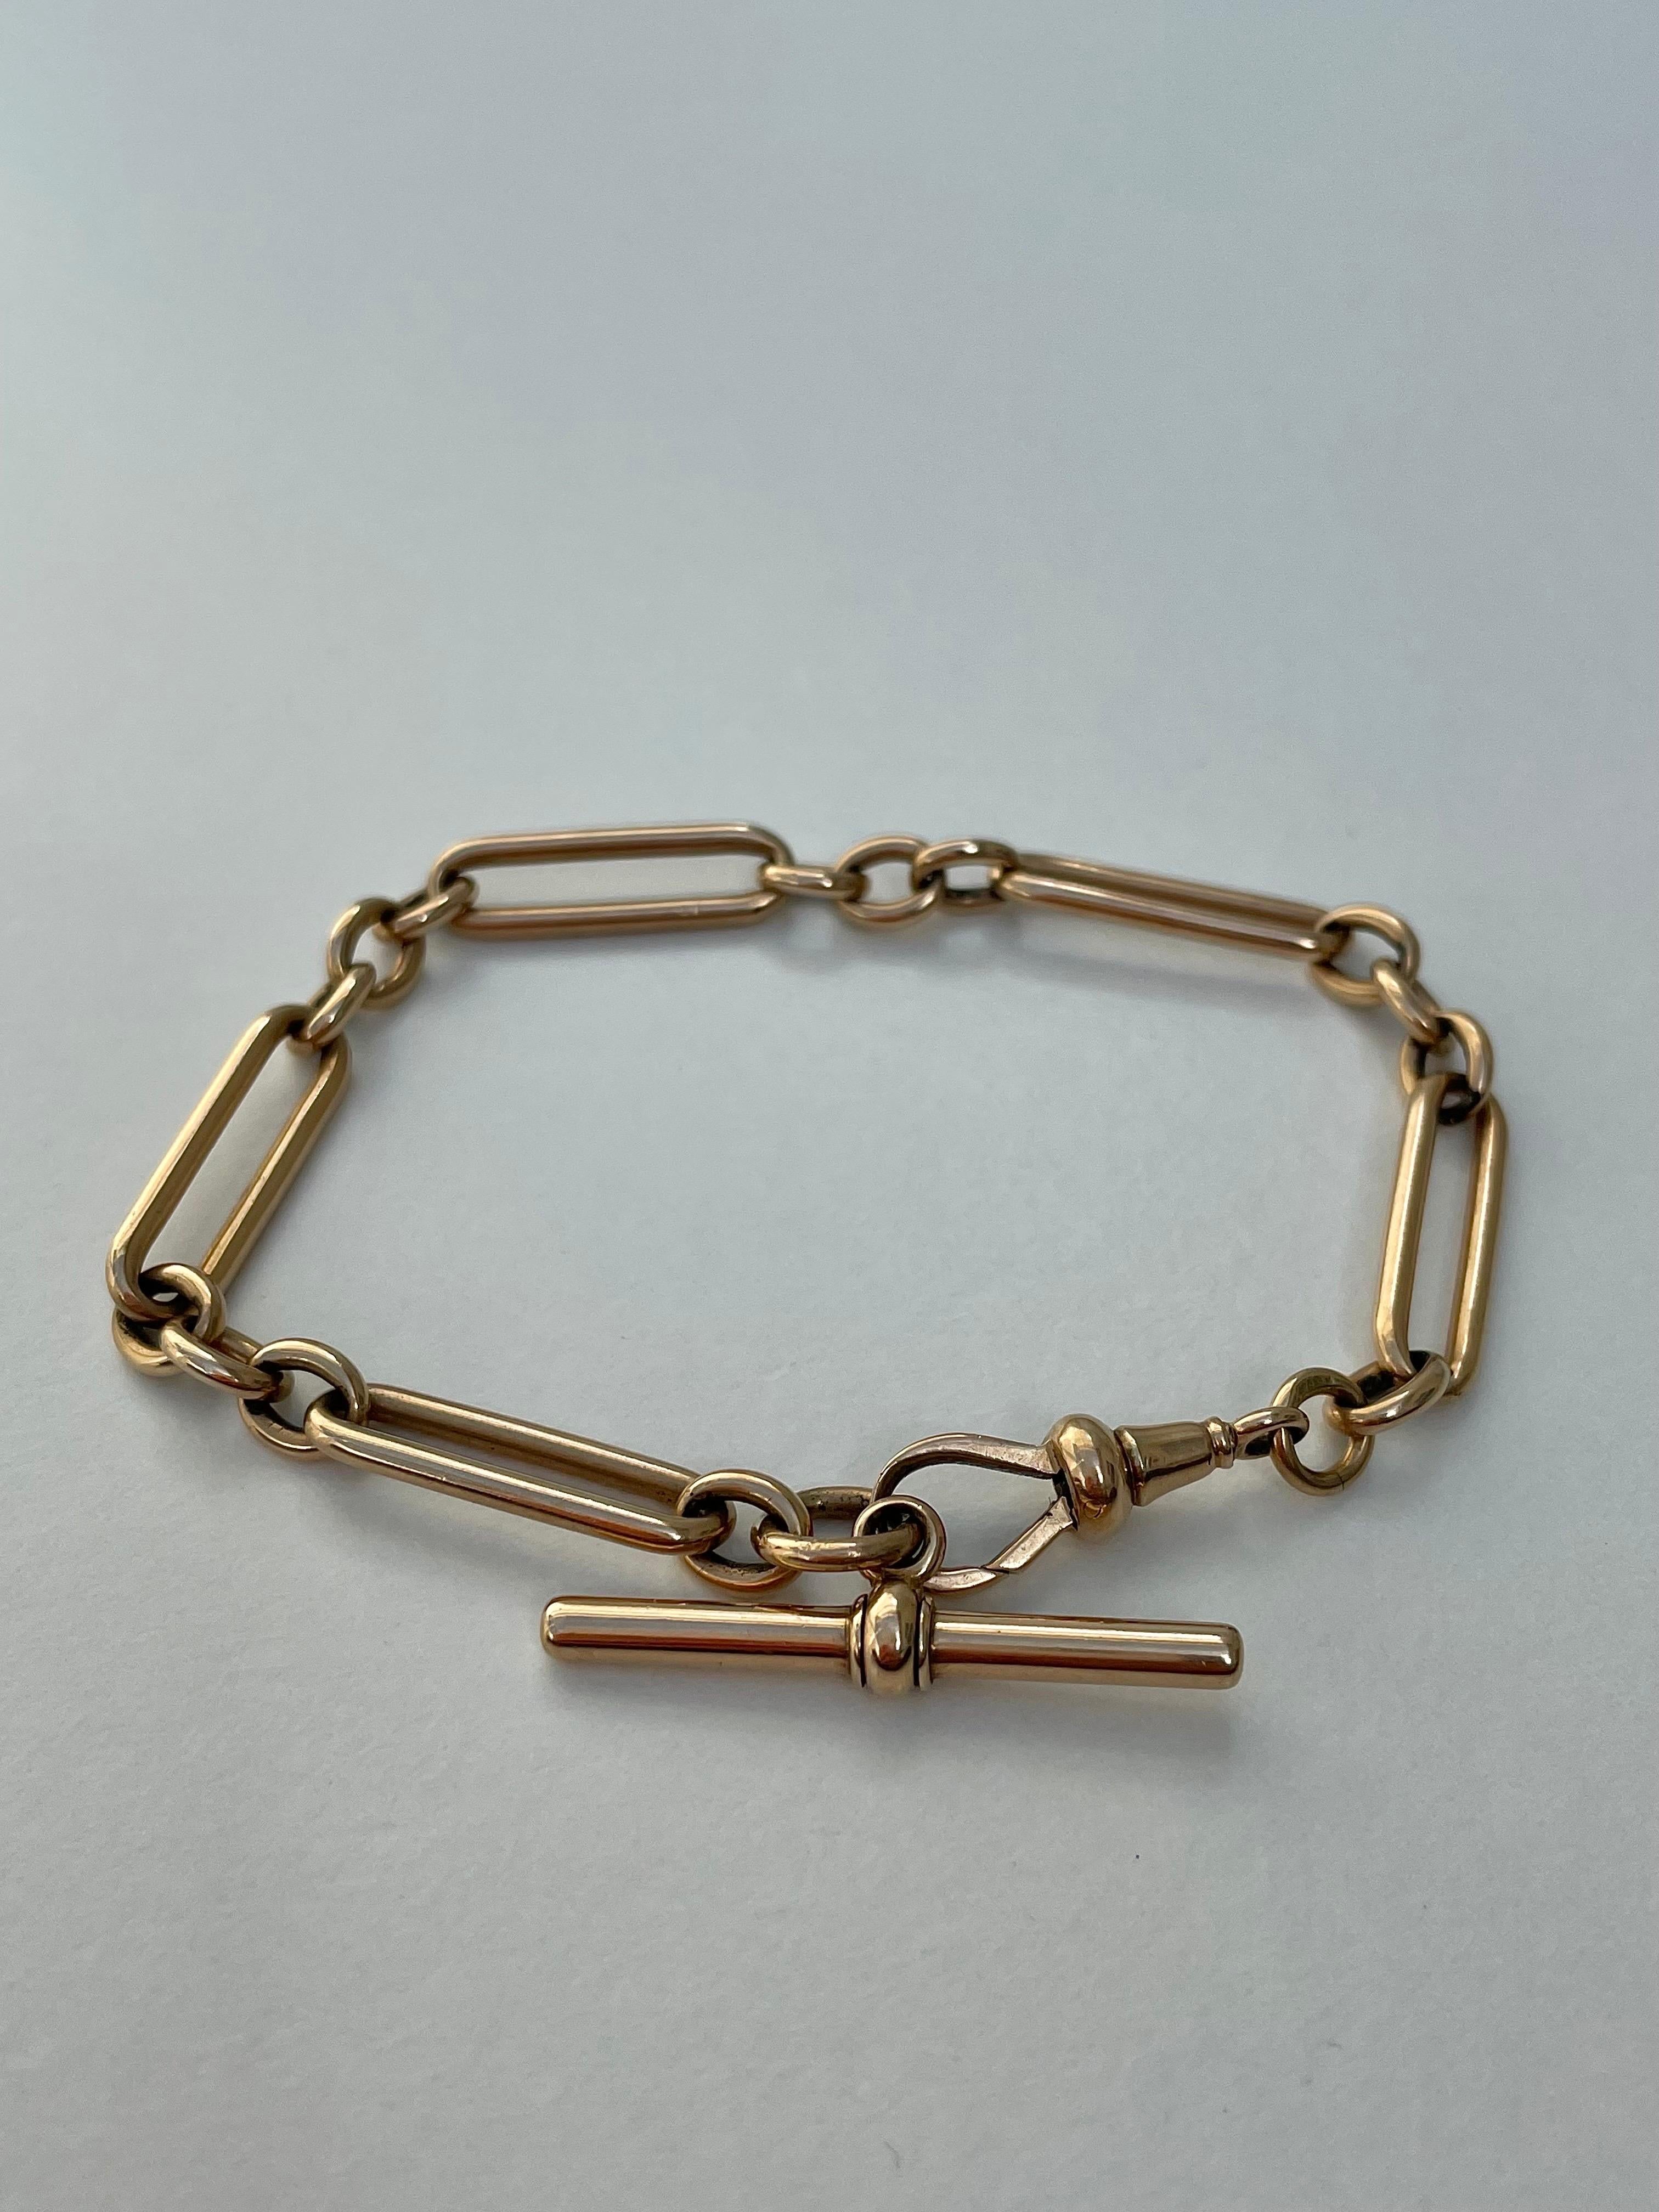 Antique 9ct Trombone Link Bracelet with TBar and dog clip 

beautiful and classic link bracelet, everyday wear! 

The item comes without the box in the photos but will be presented in a gift box

Measurements: weight 21g, length 21.5cm, width